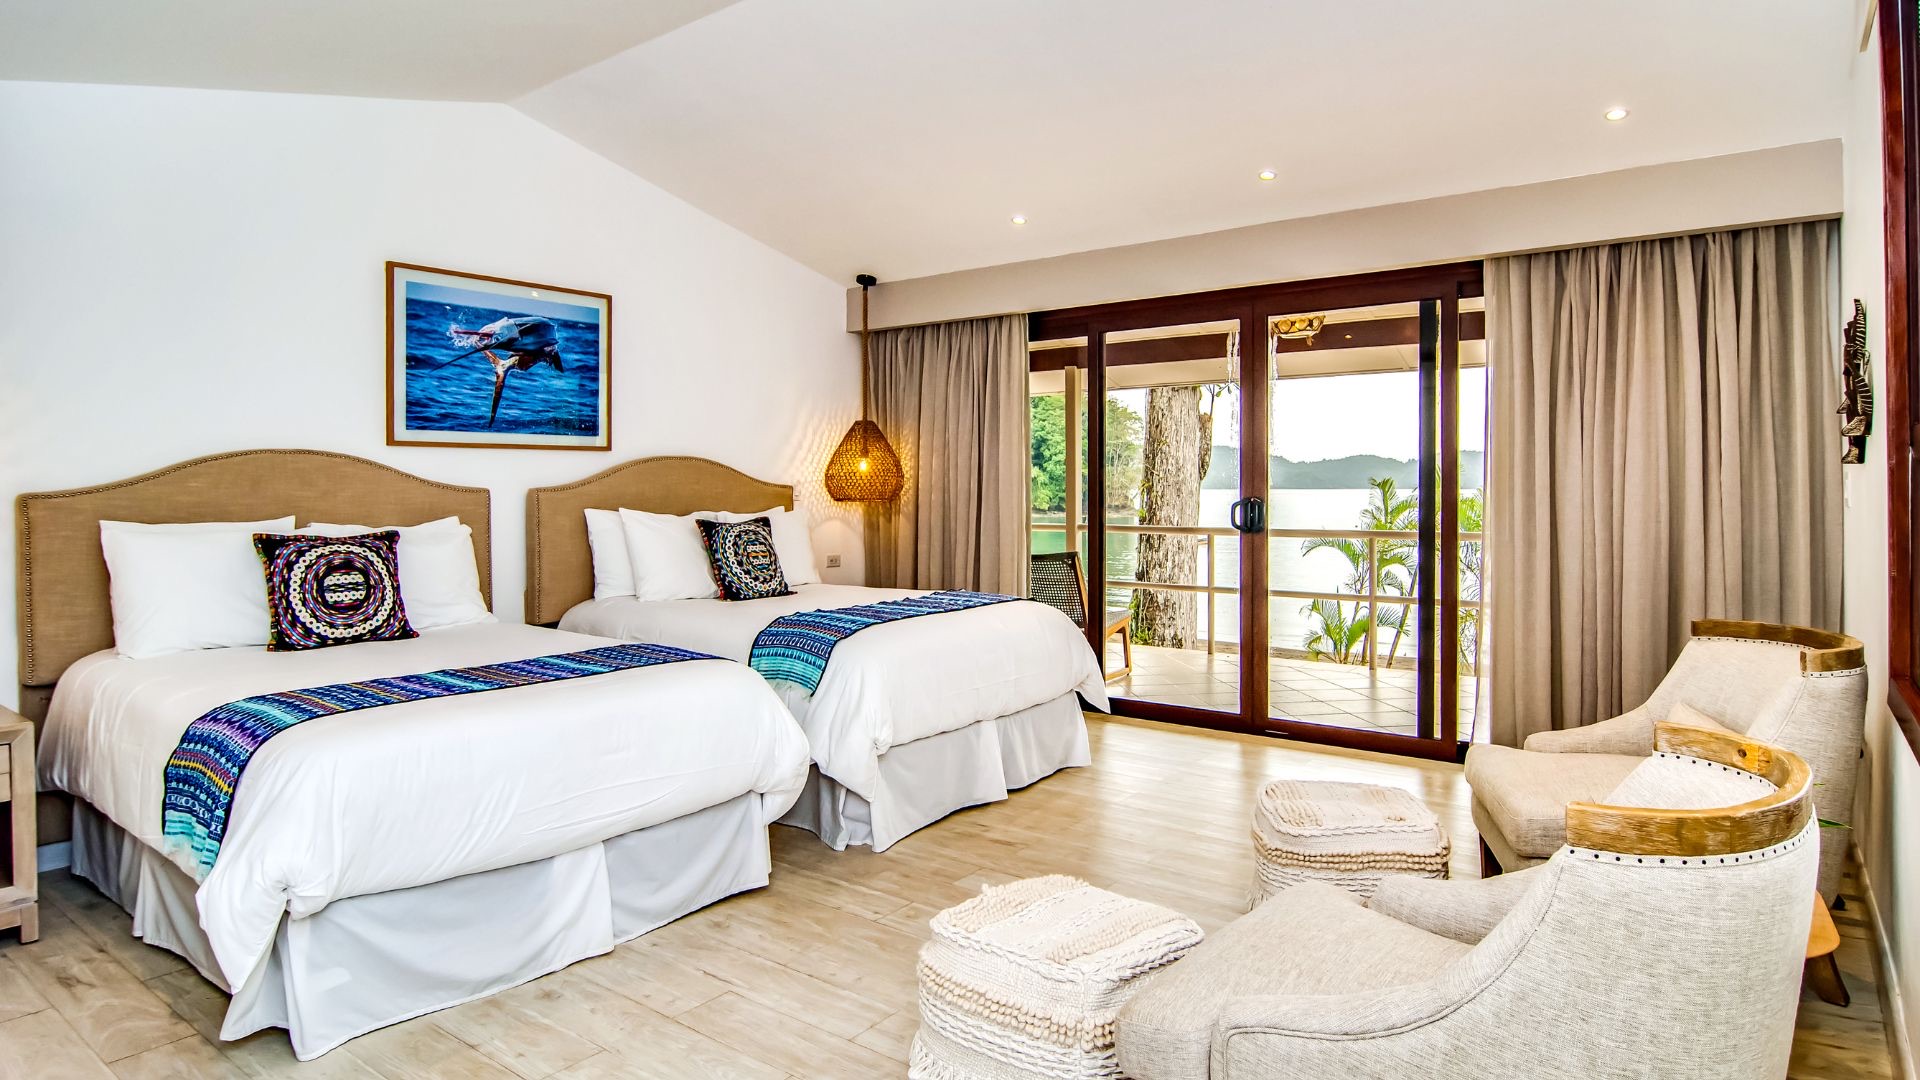 Luxury rooms with views at the Tropic Star Lodge